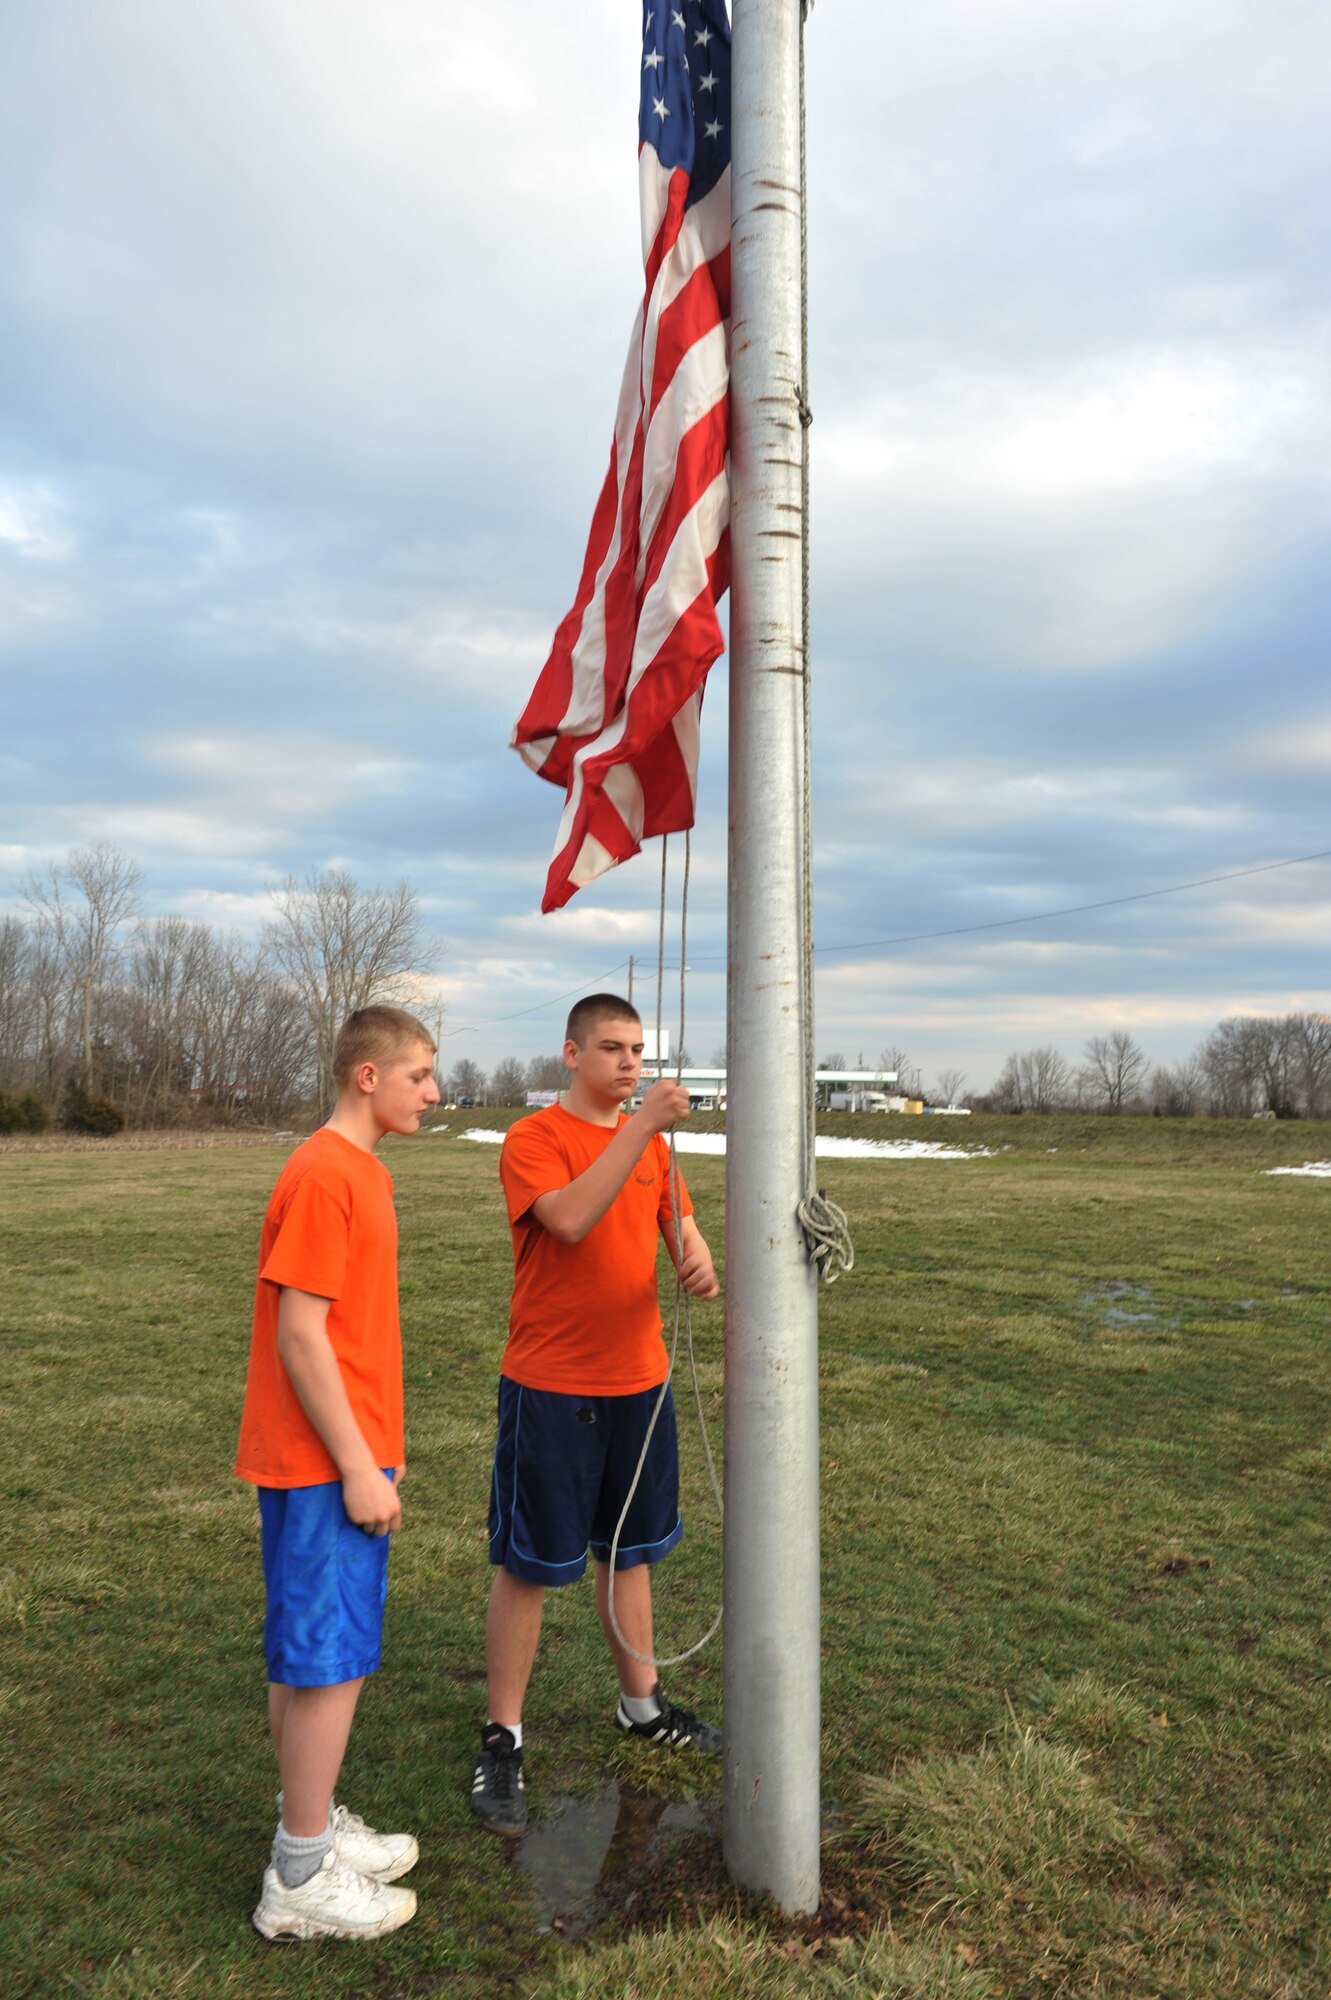 Camren, 15, and Jeremiah, 14, members of the Sedalia Civil Air Patrol squadron, raise the U.S. flag prior to their weekly meeting, March 28, 2013, in Sedalia, Mo. Interested individuals can learn more about opportunities available and membership eligibility during the squadron’s weekly Thursday meetings from 6:30-9 p.m. (U.S. Air Force photo by Heidi Hunt/Released)